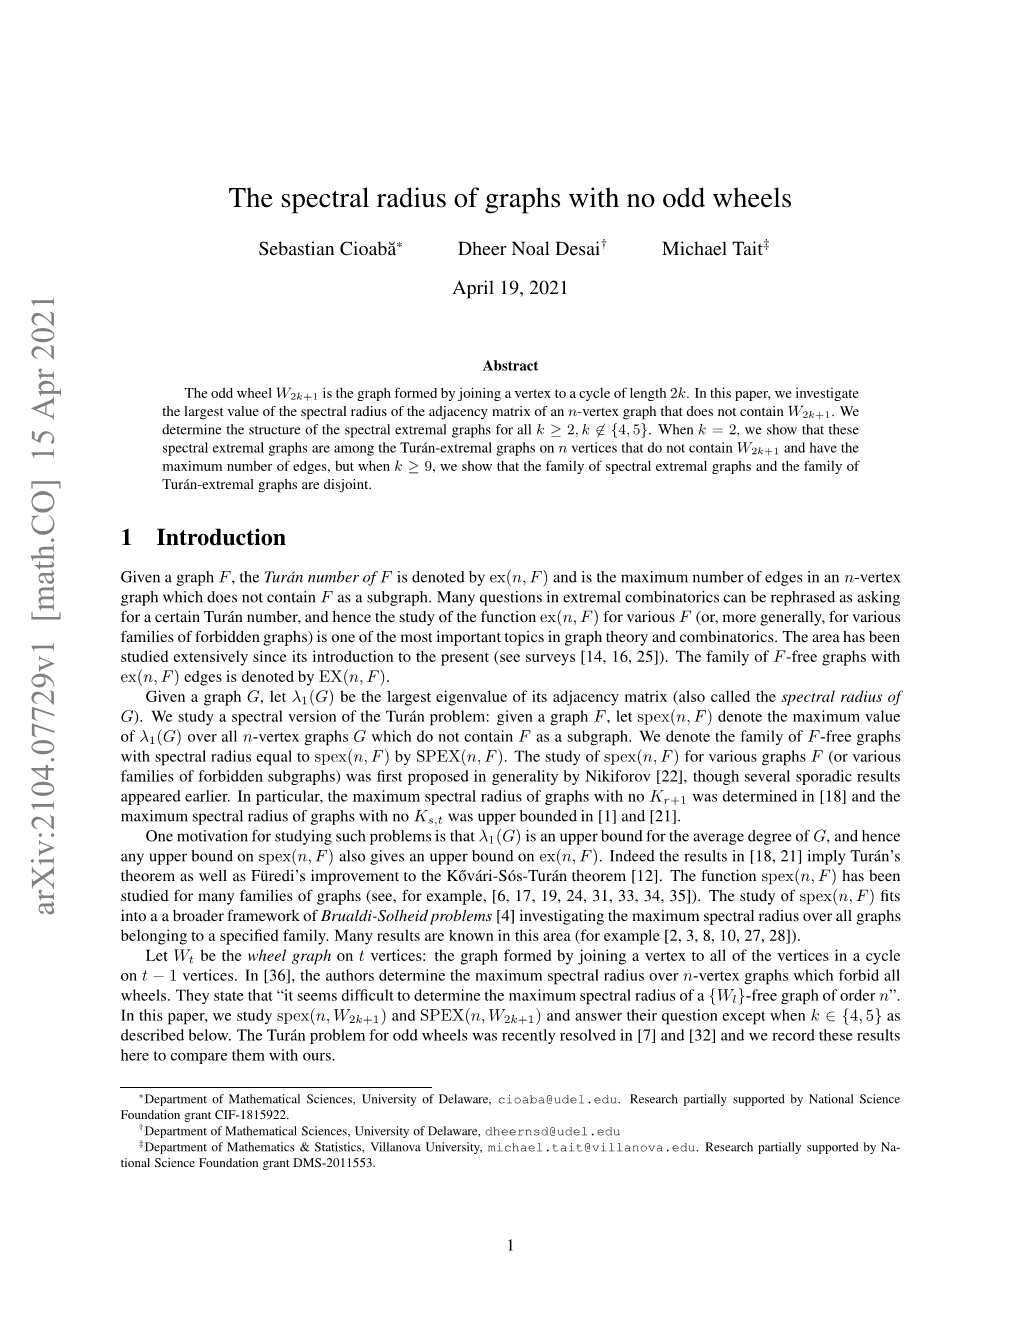 The Spectral Radius of Graphs with No Odd Wheels